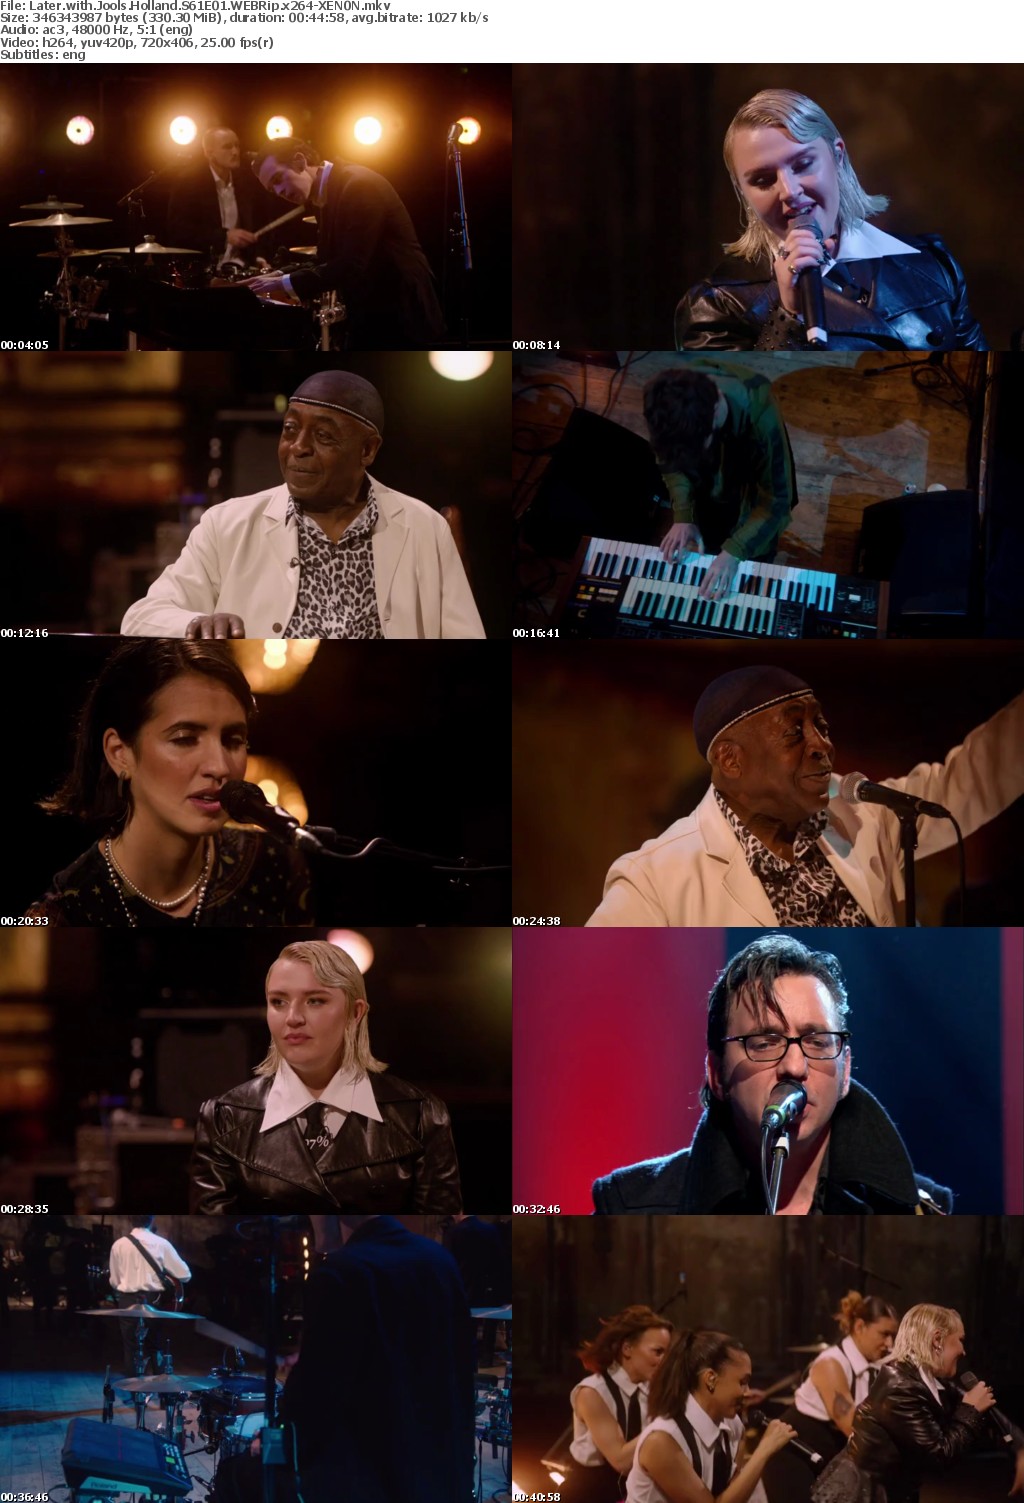 Later with Jools Holland S61E01 WEBRip x264-XEN0N